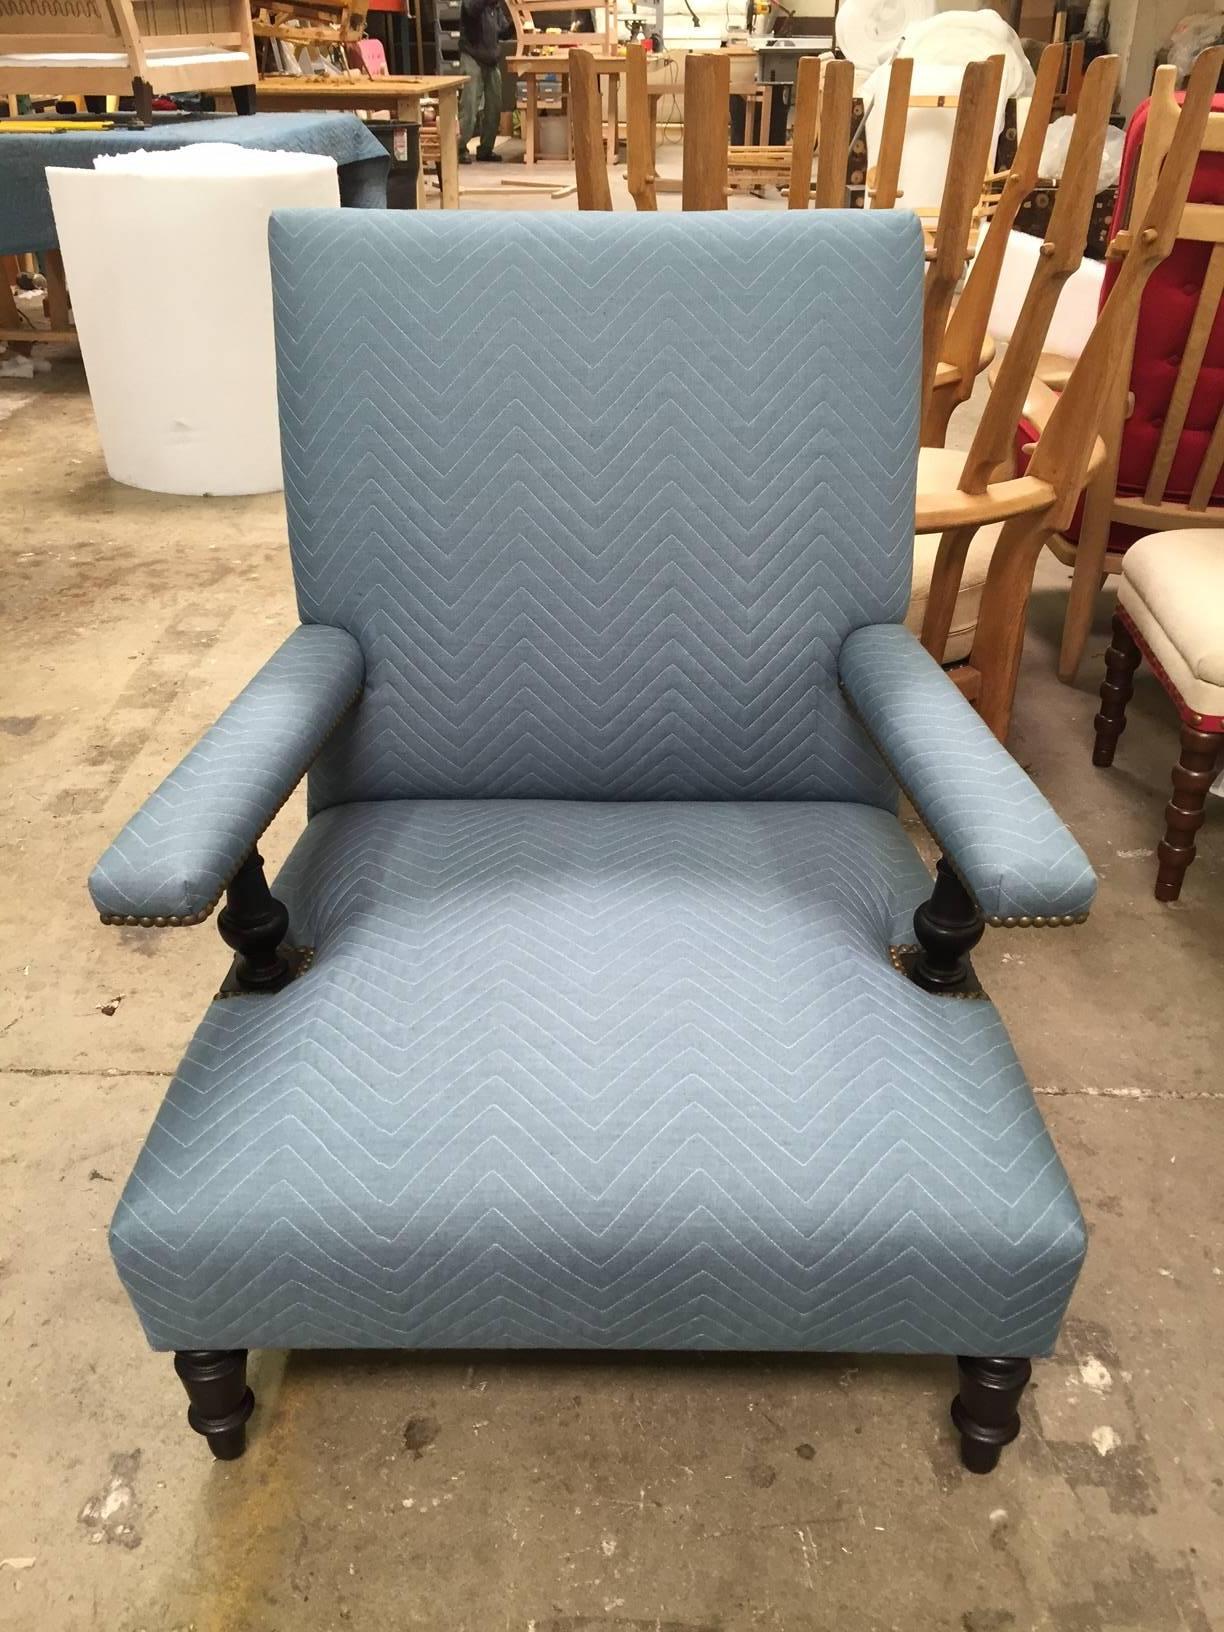 19th Century French Arm Chair - Rebuilt, Reupholstered in Peter Dunham Fabric
28